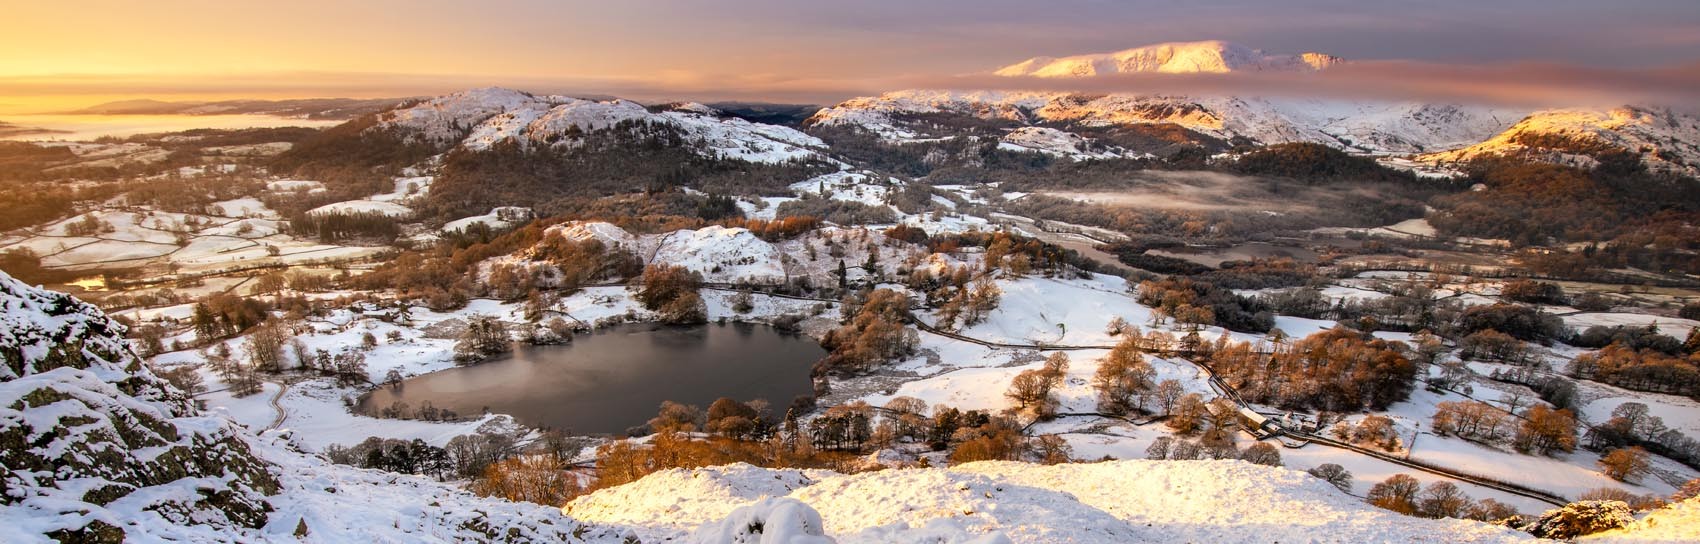 A wintry view from Loughrigg Fell near Ambleside. Photograph by JAMES LINDSAY